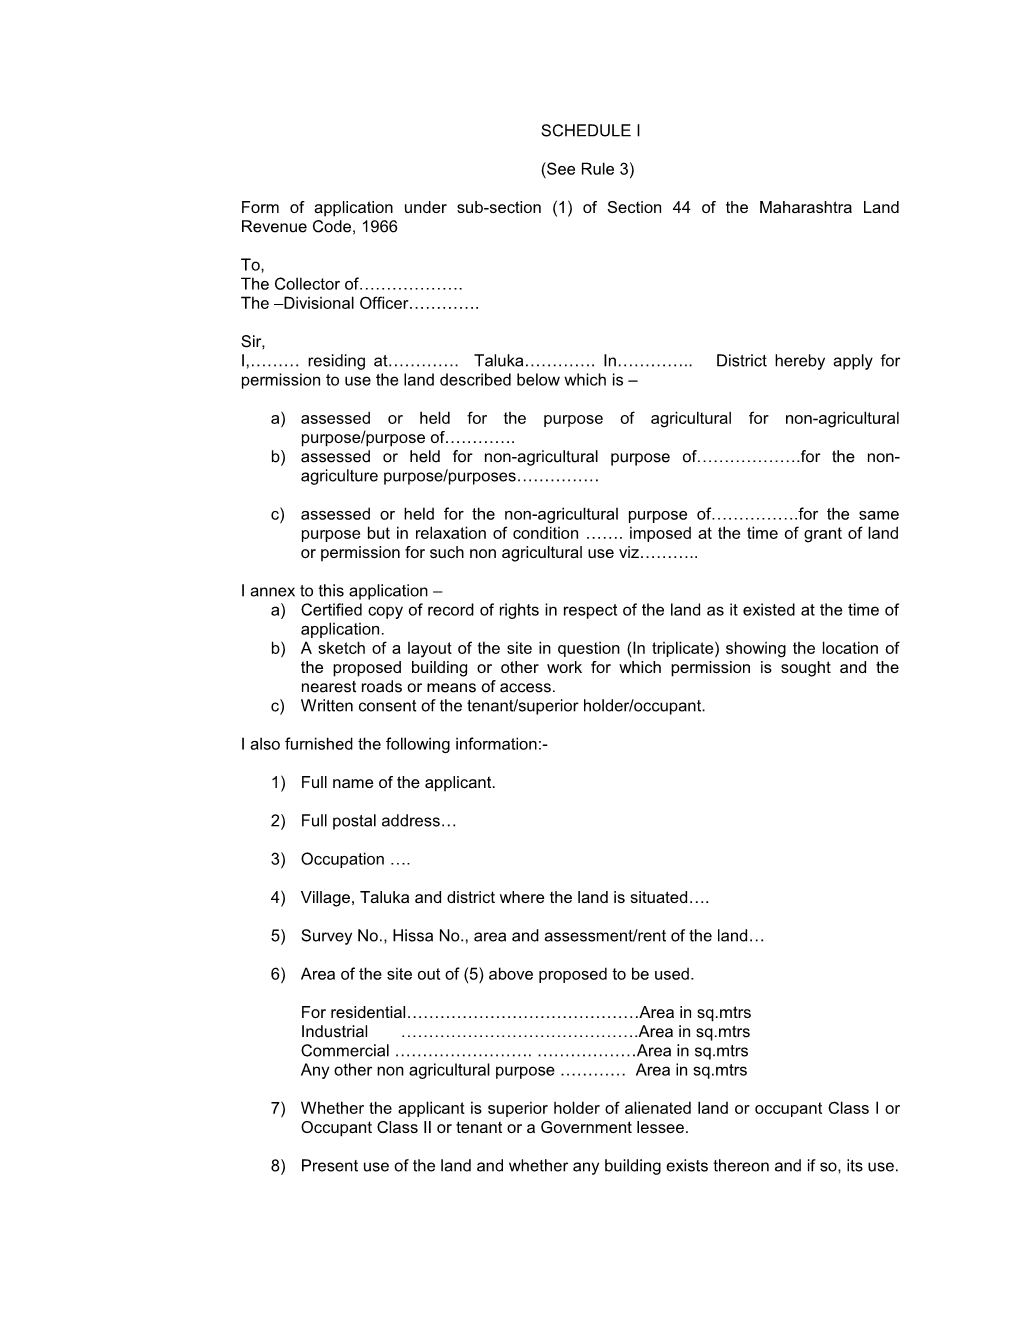 Form of Application Under Sub-Section (1) of Section 44 of the Maharashtra Land Revenue